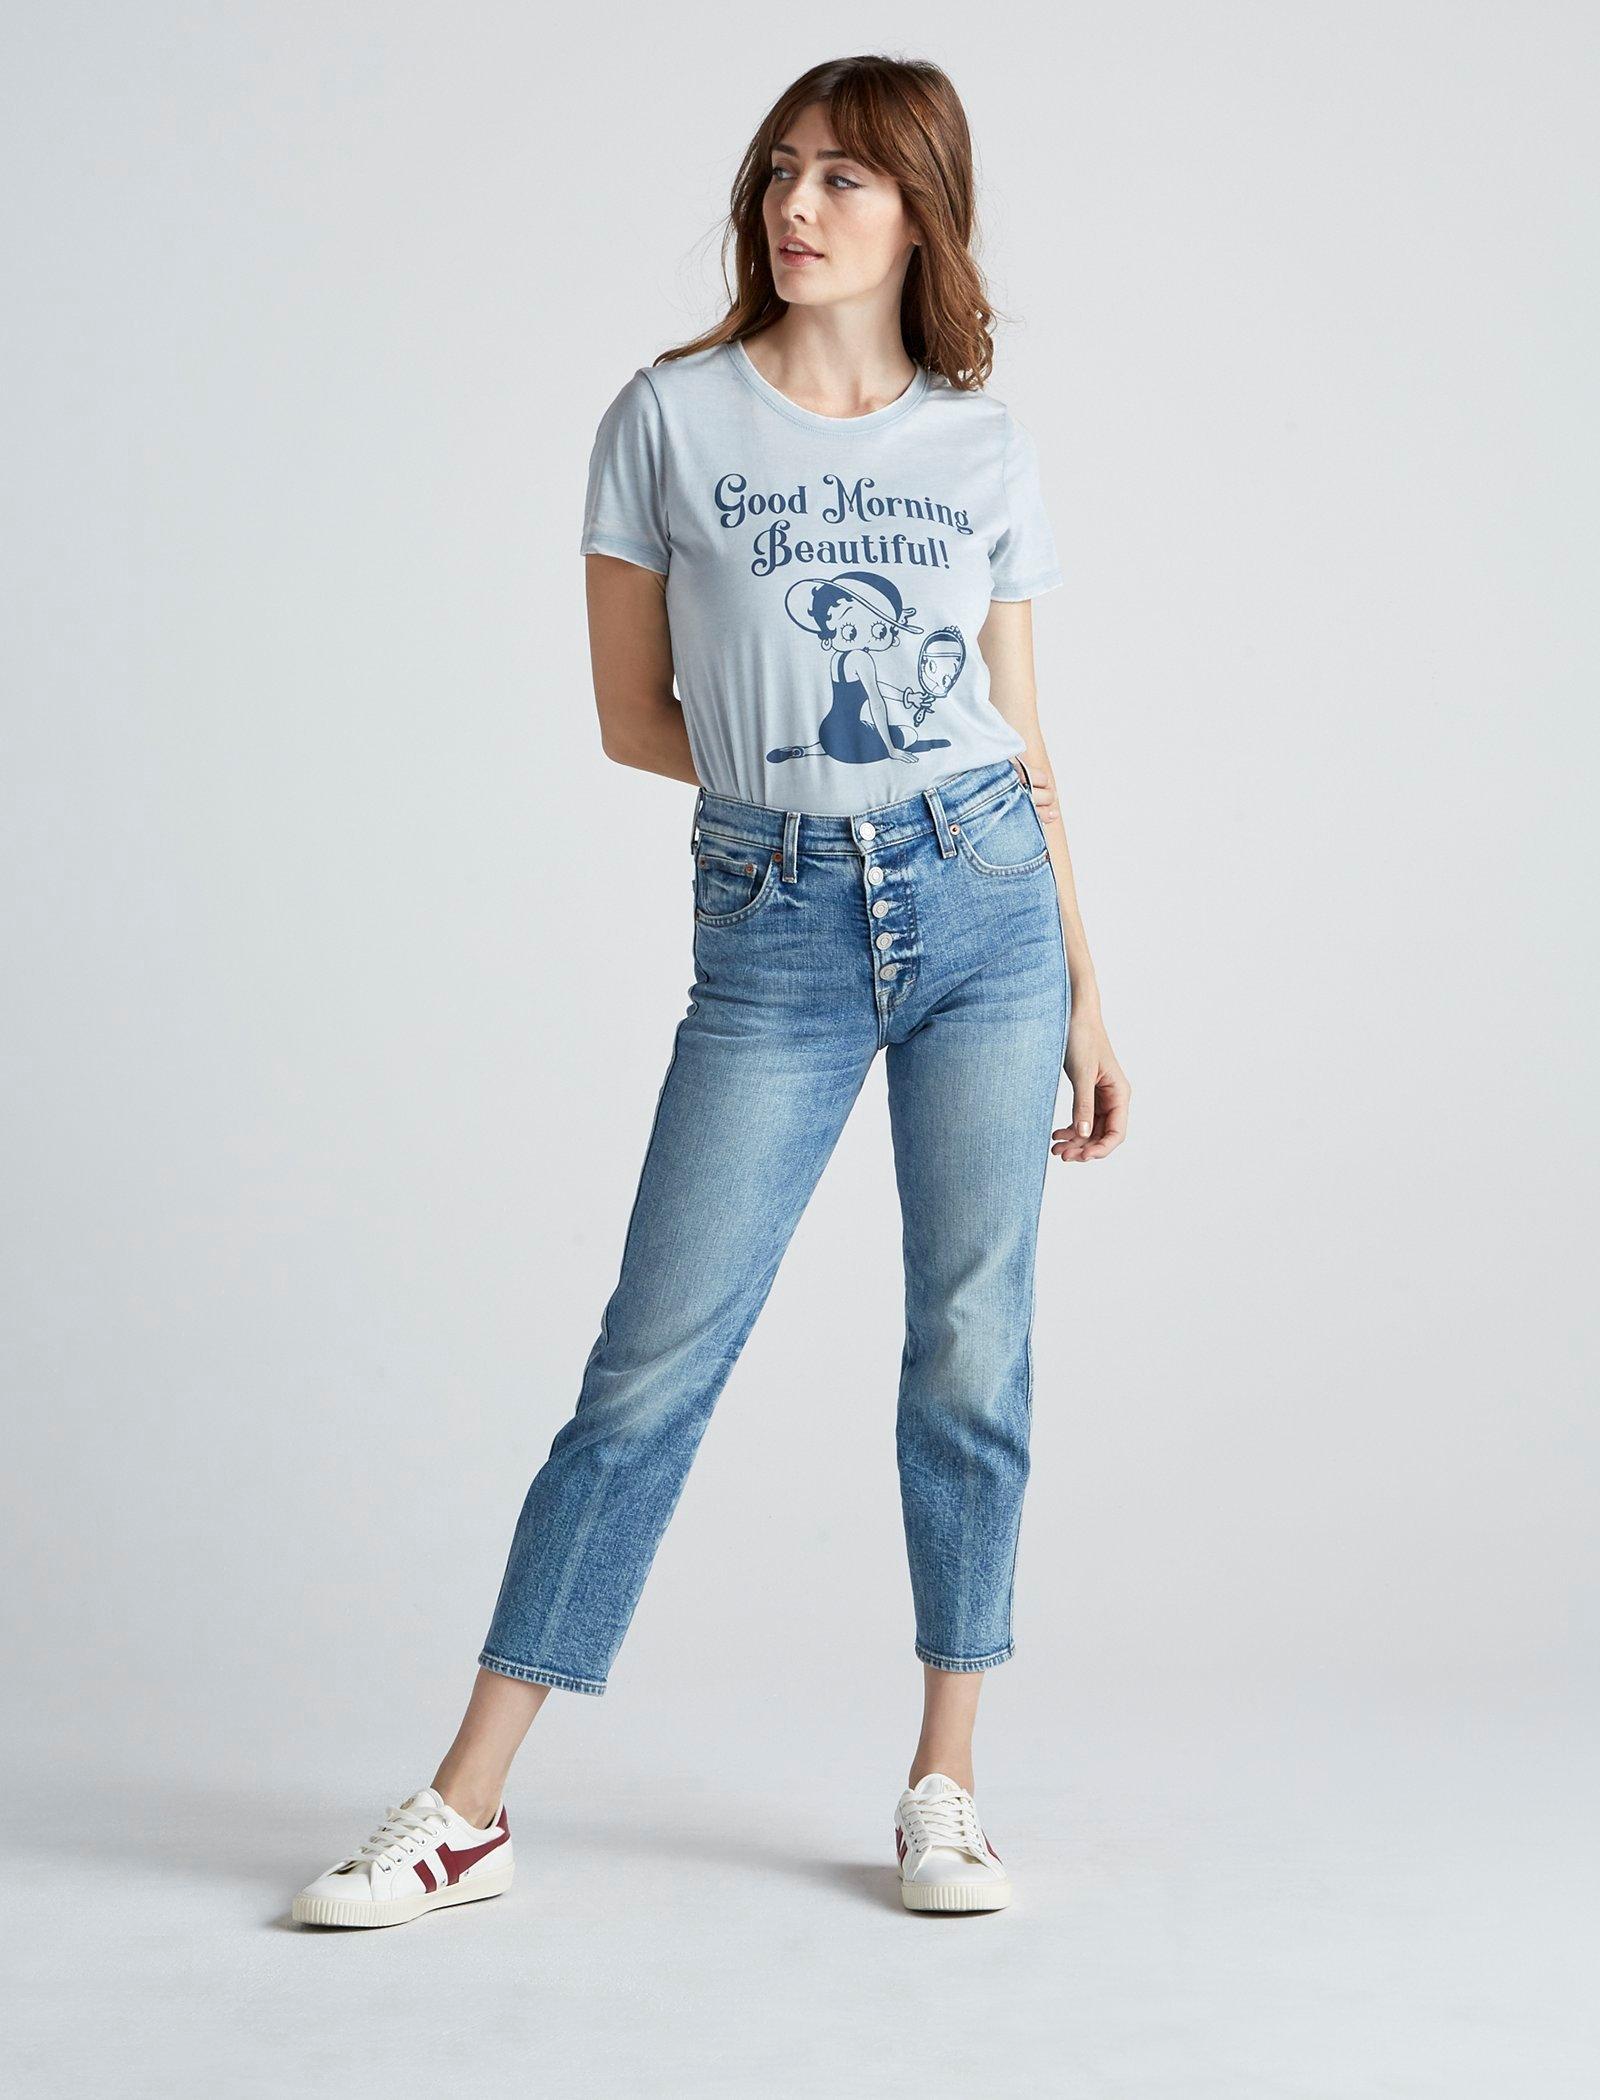 Graphic Tees for Women | Lucky Brand